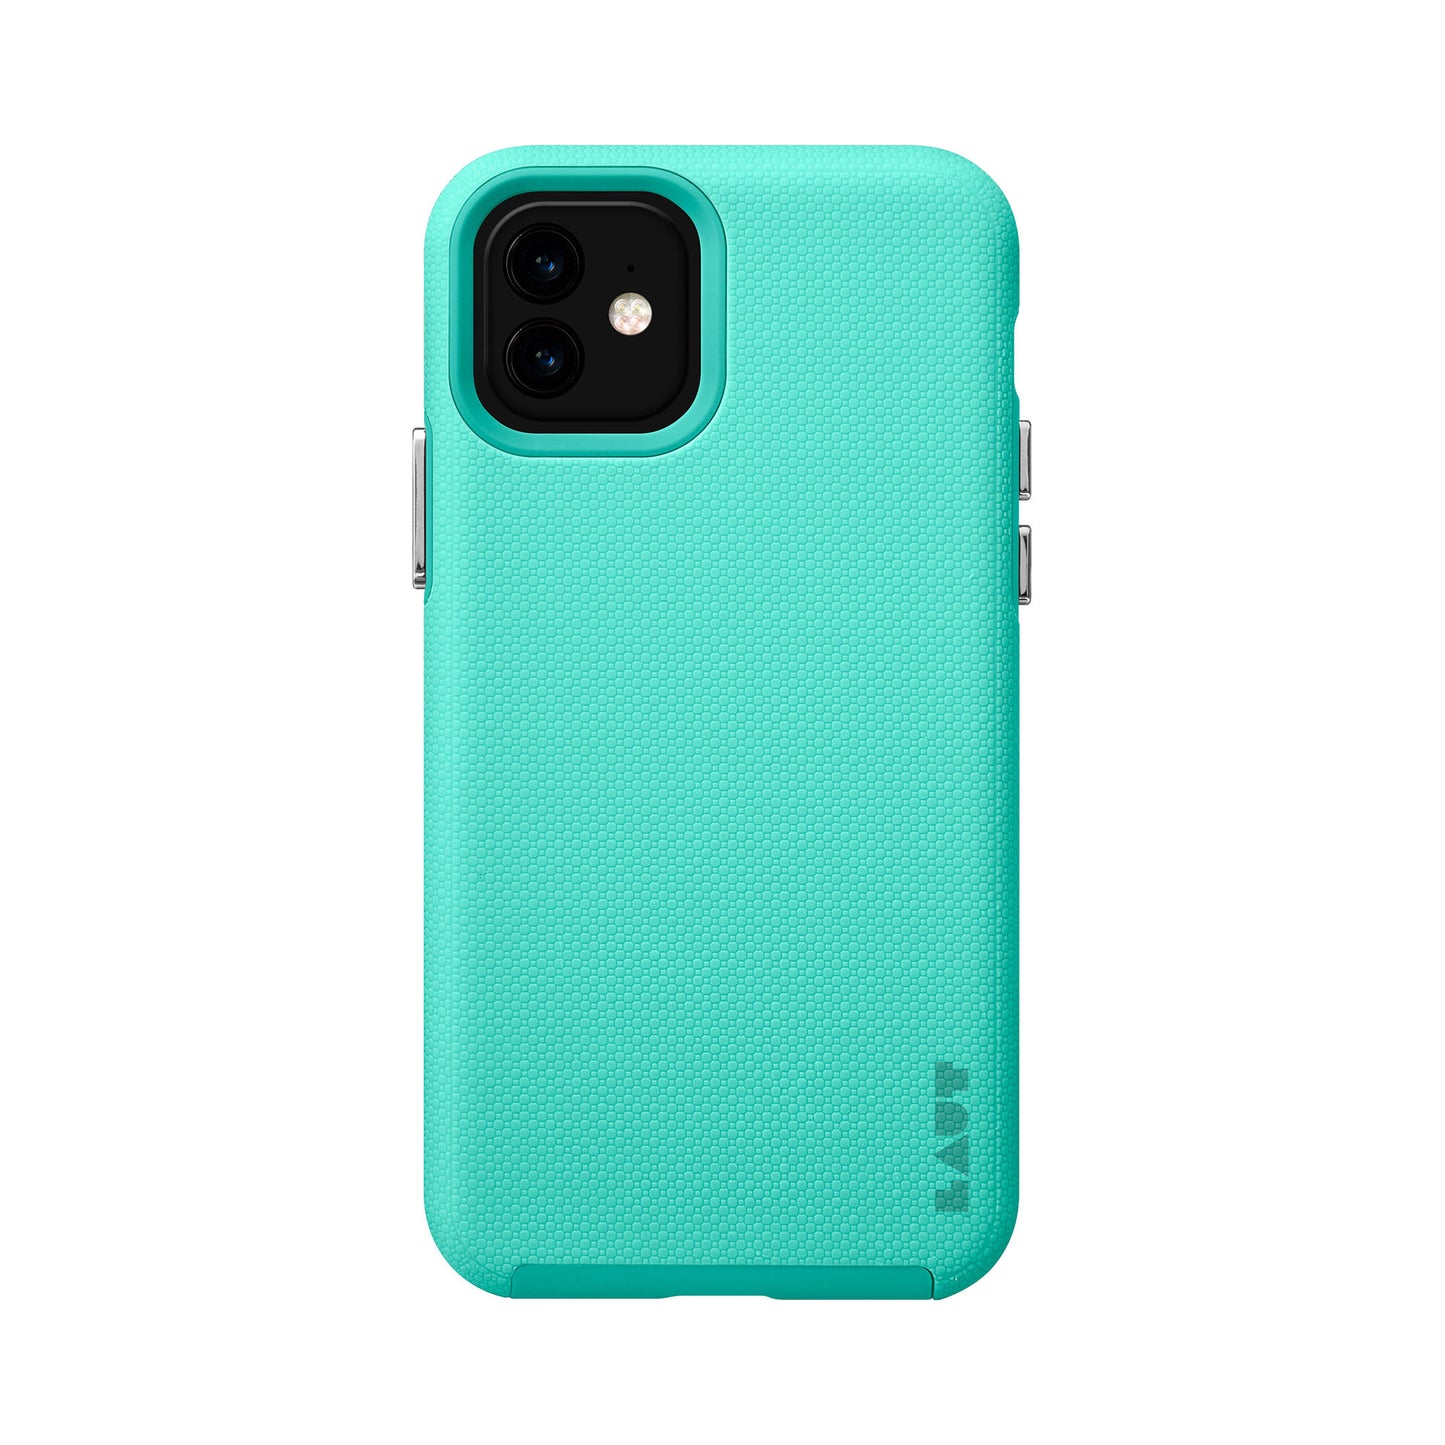 LAUT Shield for iPhone 11 - Mint